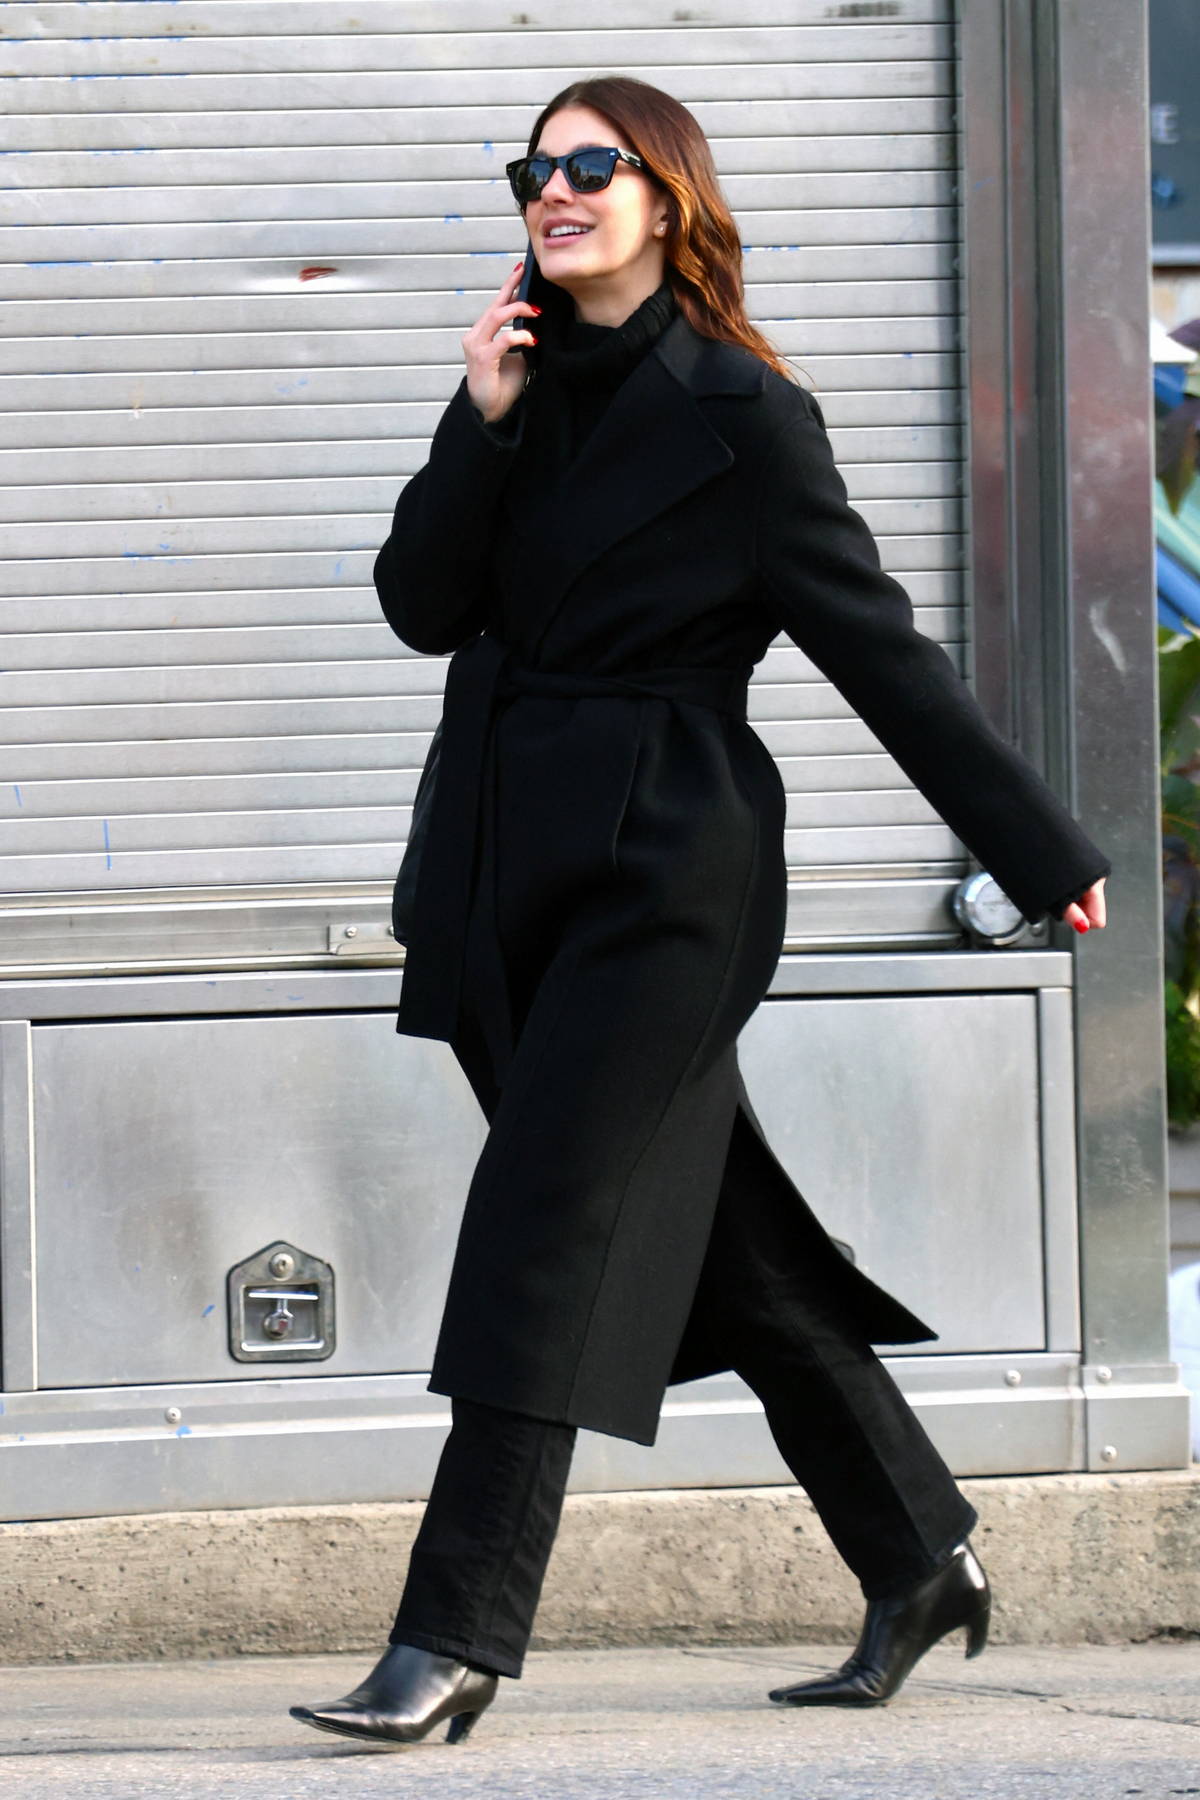 Camila Morrone looks stylish in all-black ensemble while spotted